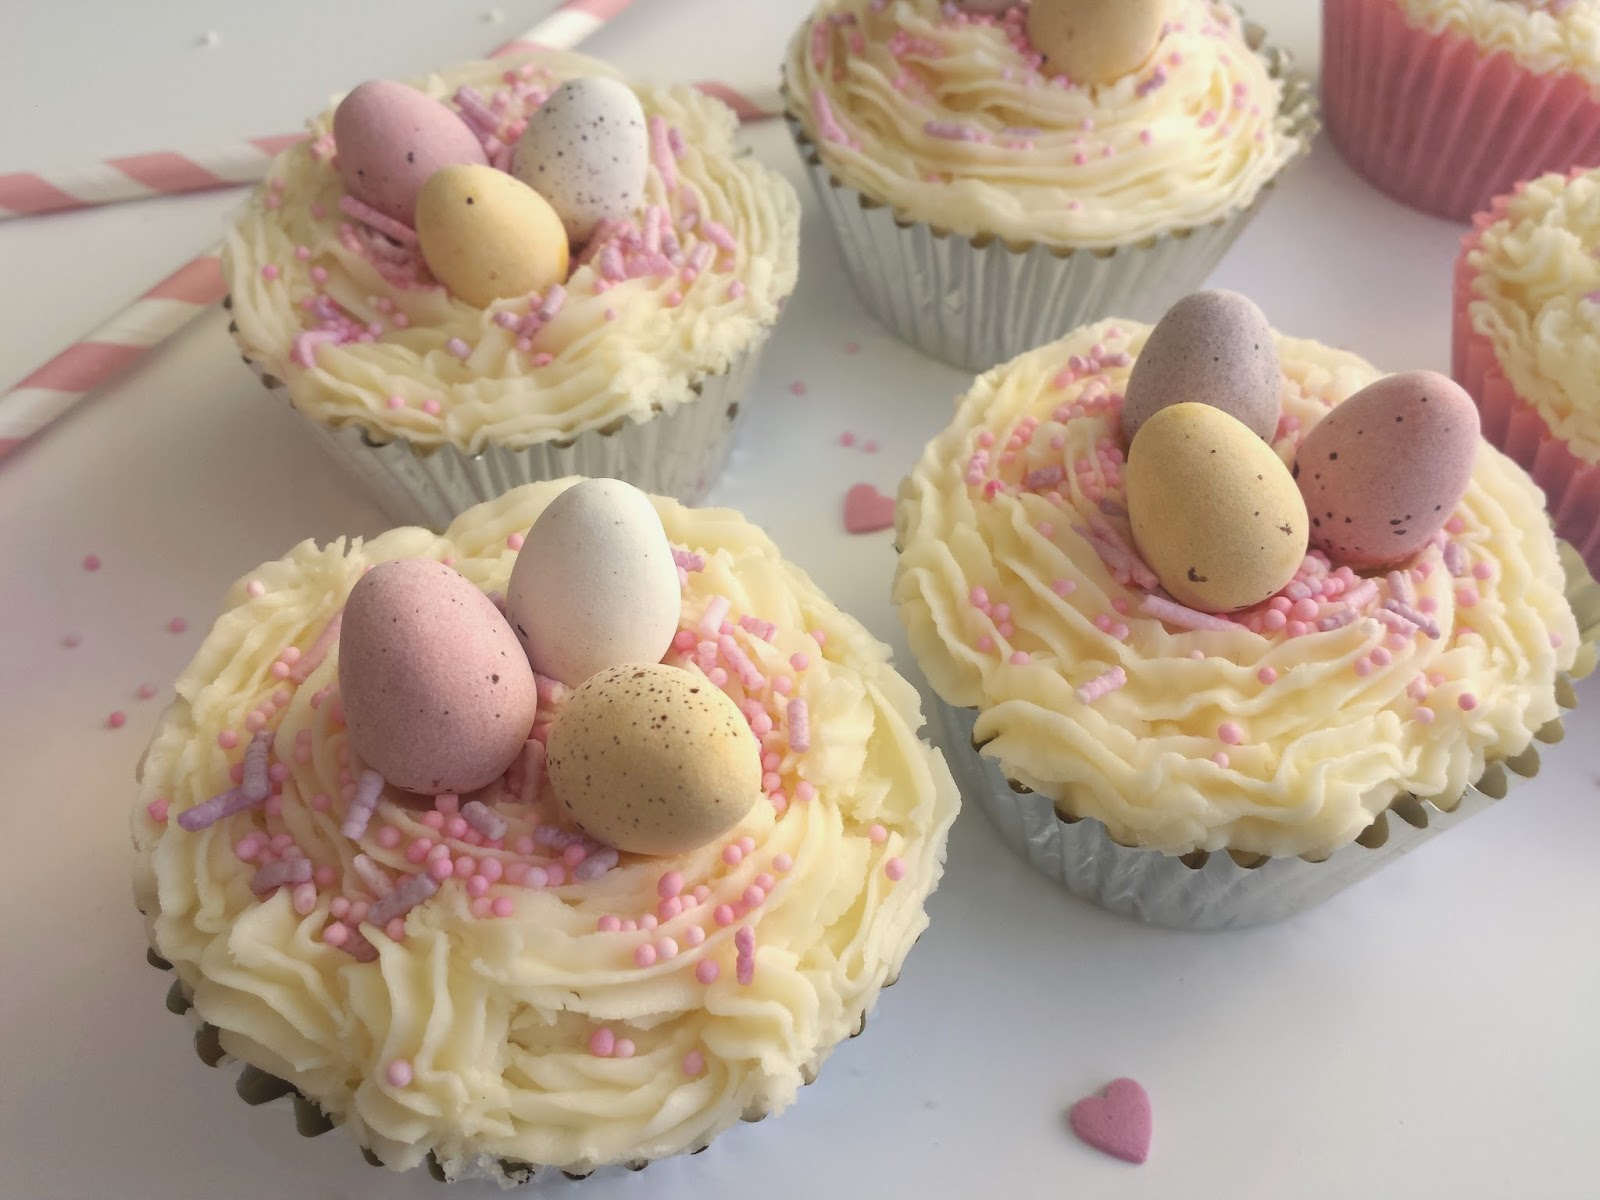 Top 15 Most Shared Easter Bunny Cupcakes – Easy Recipes To Make at Home